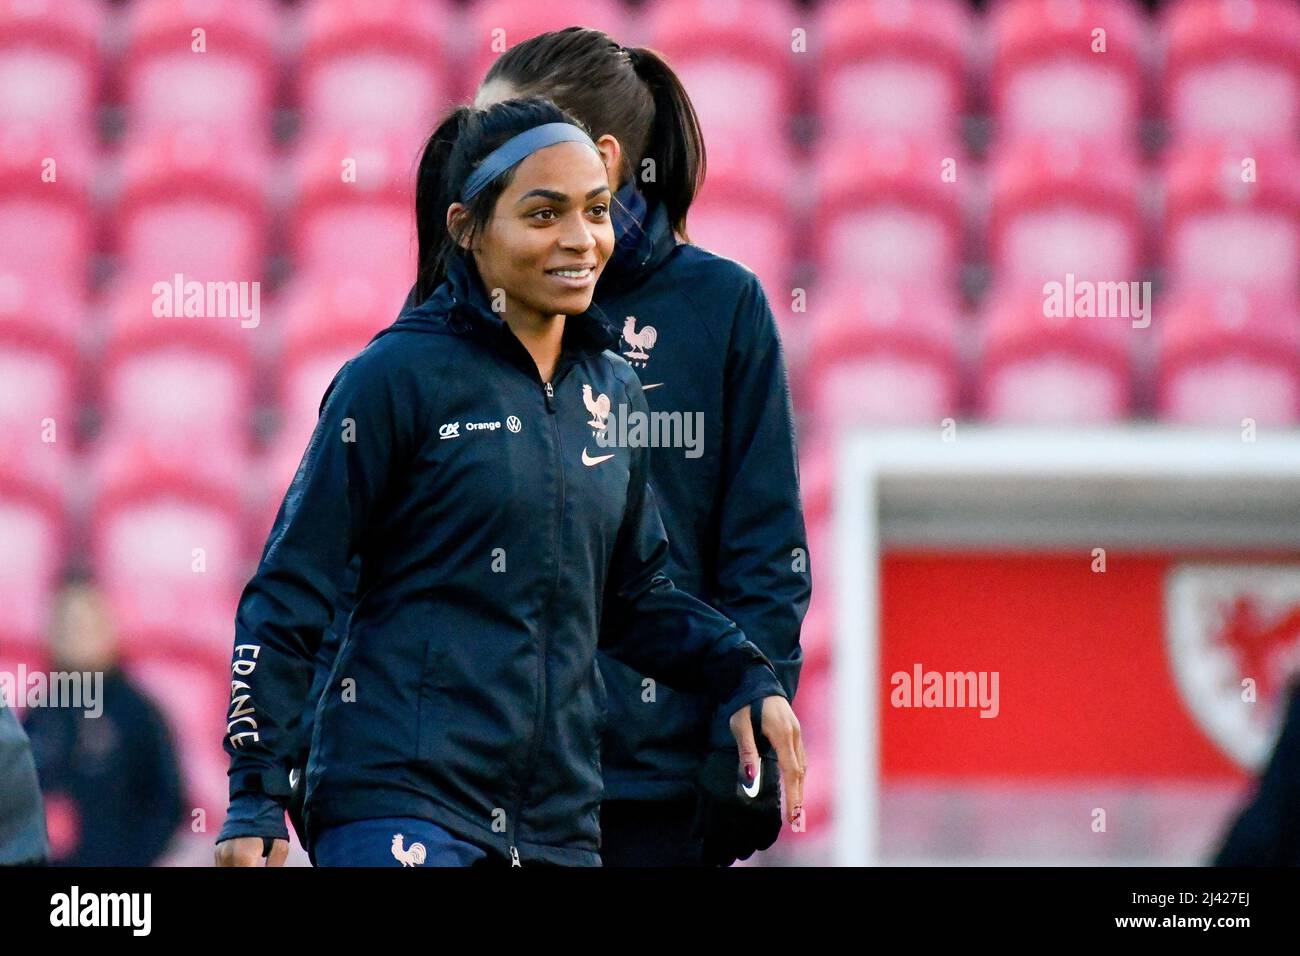 Llanelli, Wales. 8 April 2022. Perle Morroni of France Women during the pre-match warm-up before the FIFA Women's World Cup Qualifier Group I match between Wales Women and France Women at Parc y Scarlets in Llanelli, Wales, UK on 8 April 2022. Credit: Duncan Thomas/Majestic Media. Stock Photo